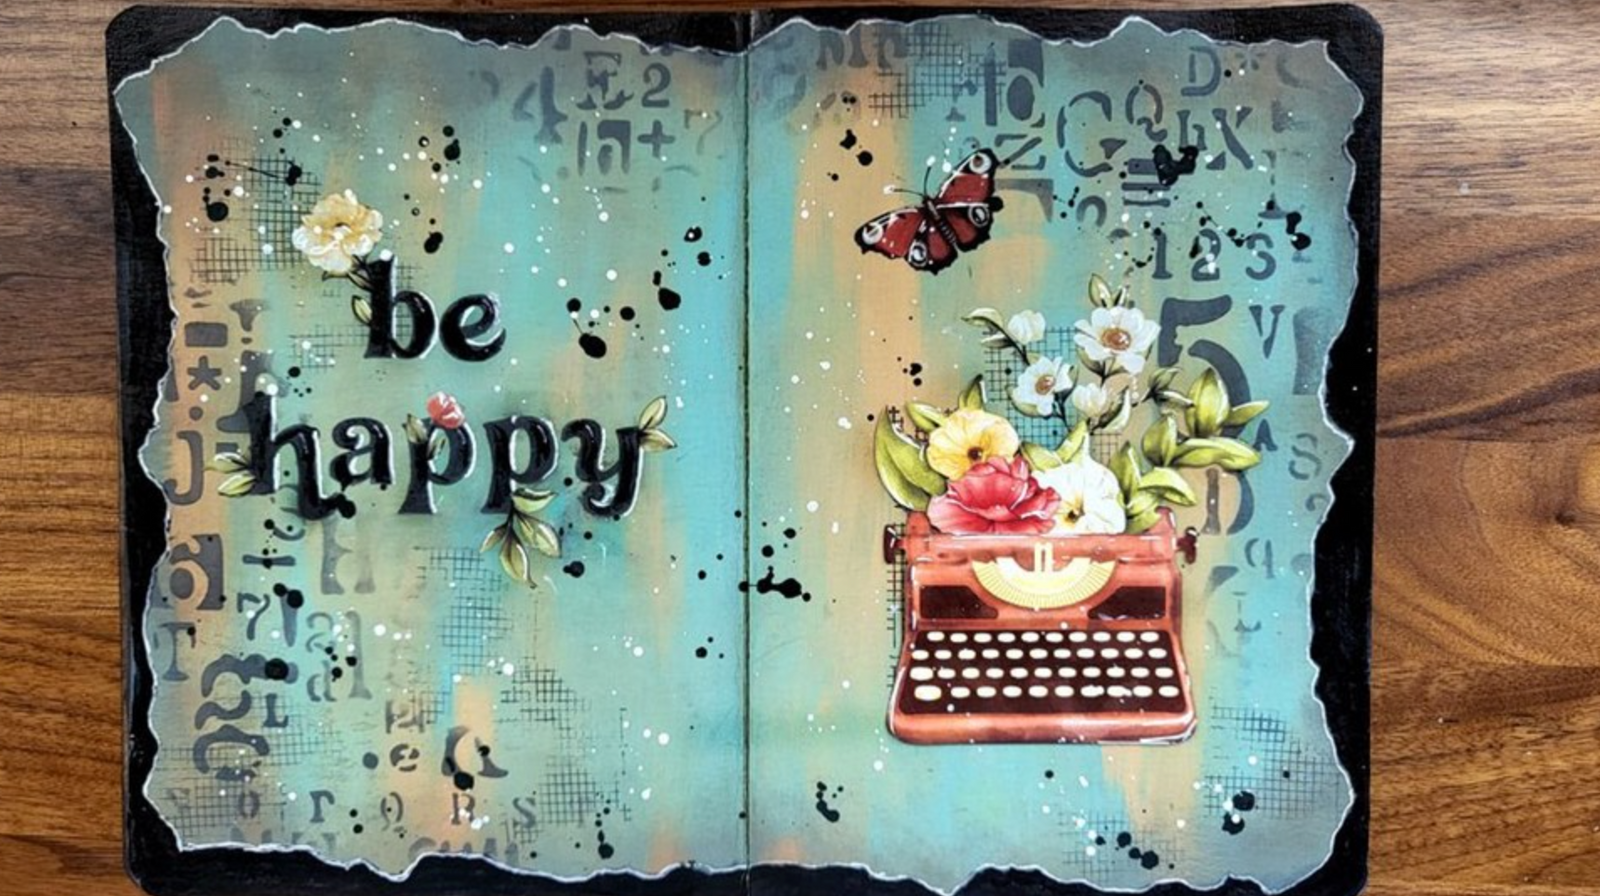 Create Happiness - Acrylic Stamp - Leaves and Movie Film - Vicky Papaioannou - Stamperia